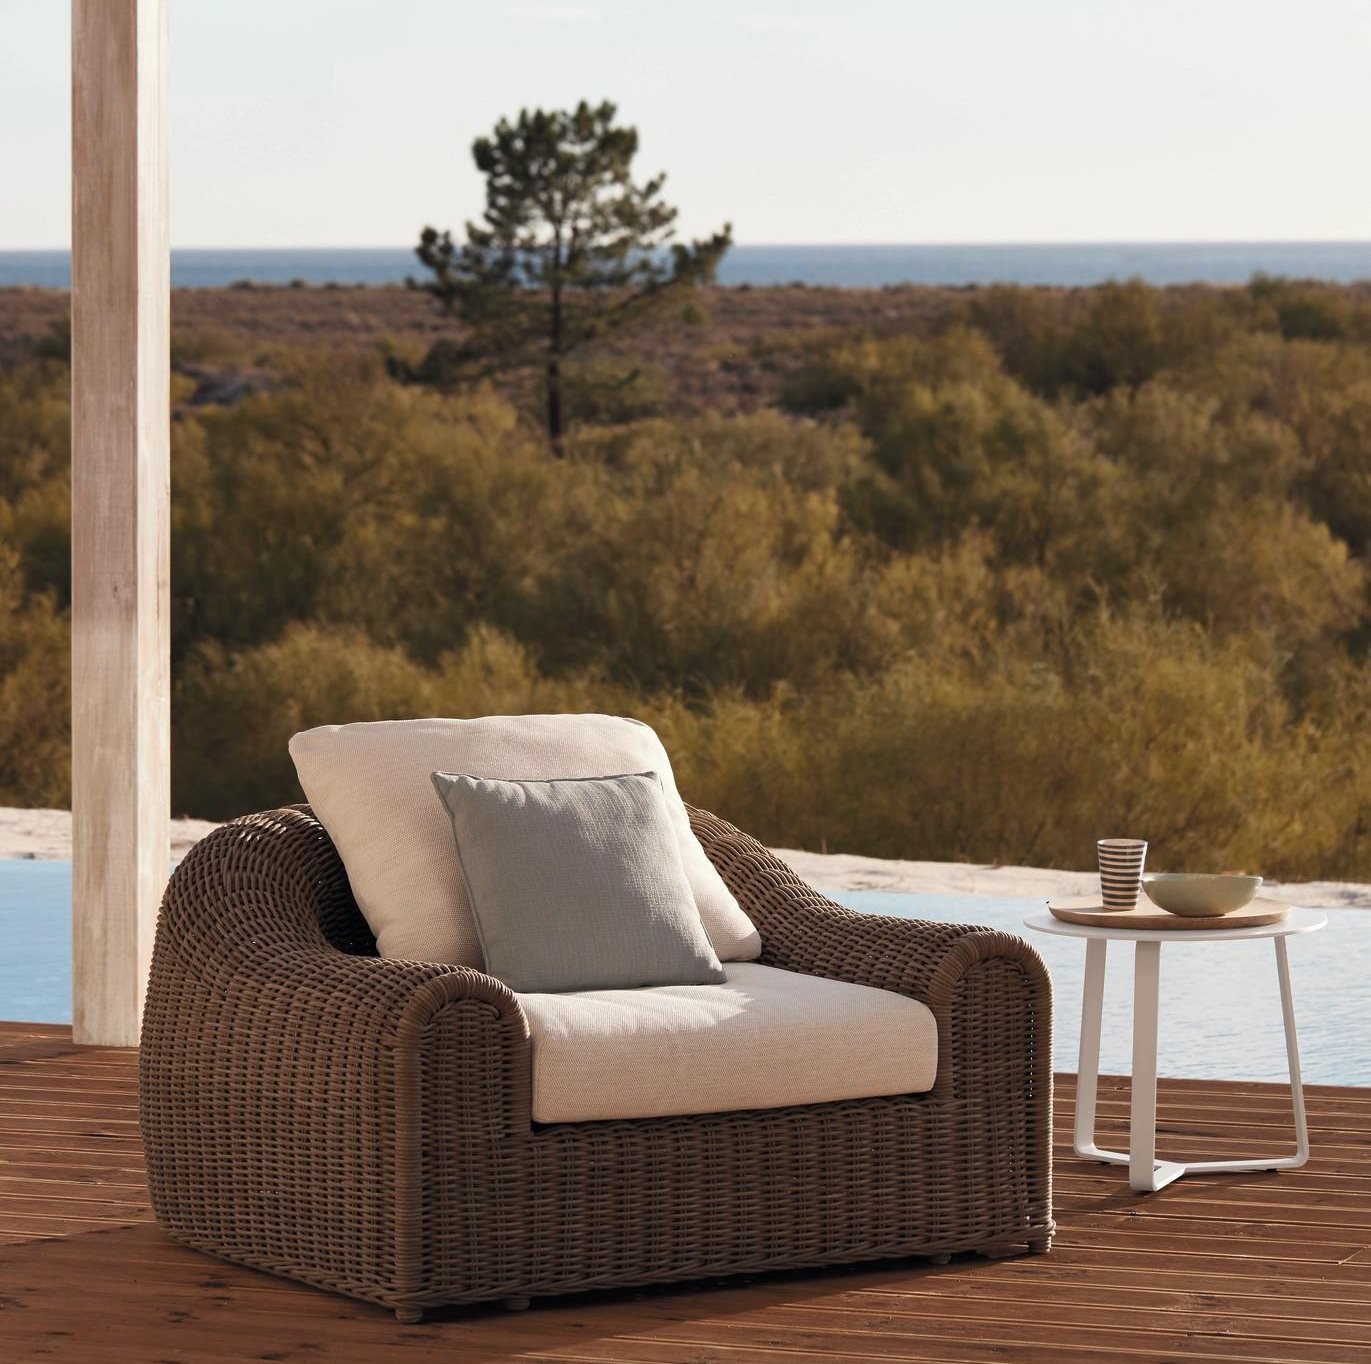 Manutti River Lounge Chair | Wooden | Outdoor-Patio Furniture - Ultra ...